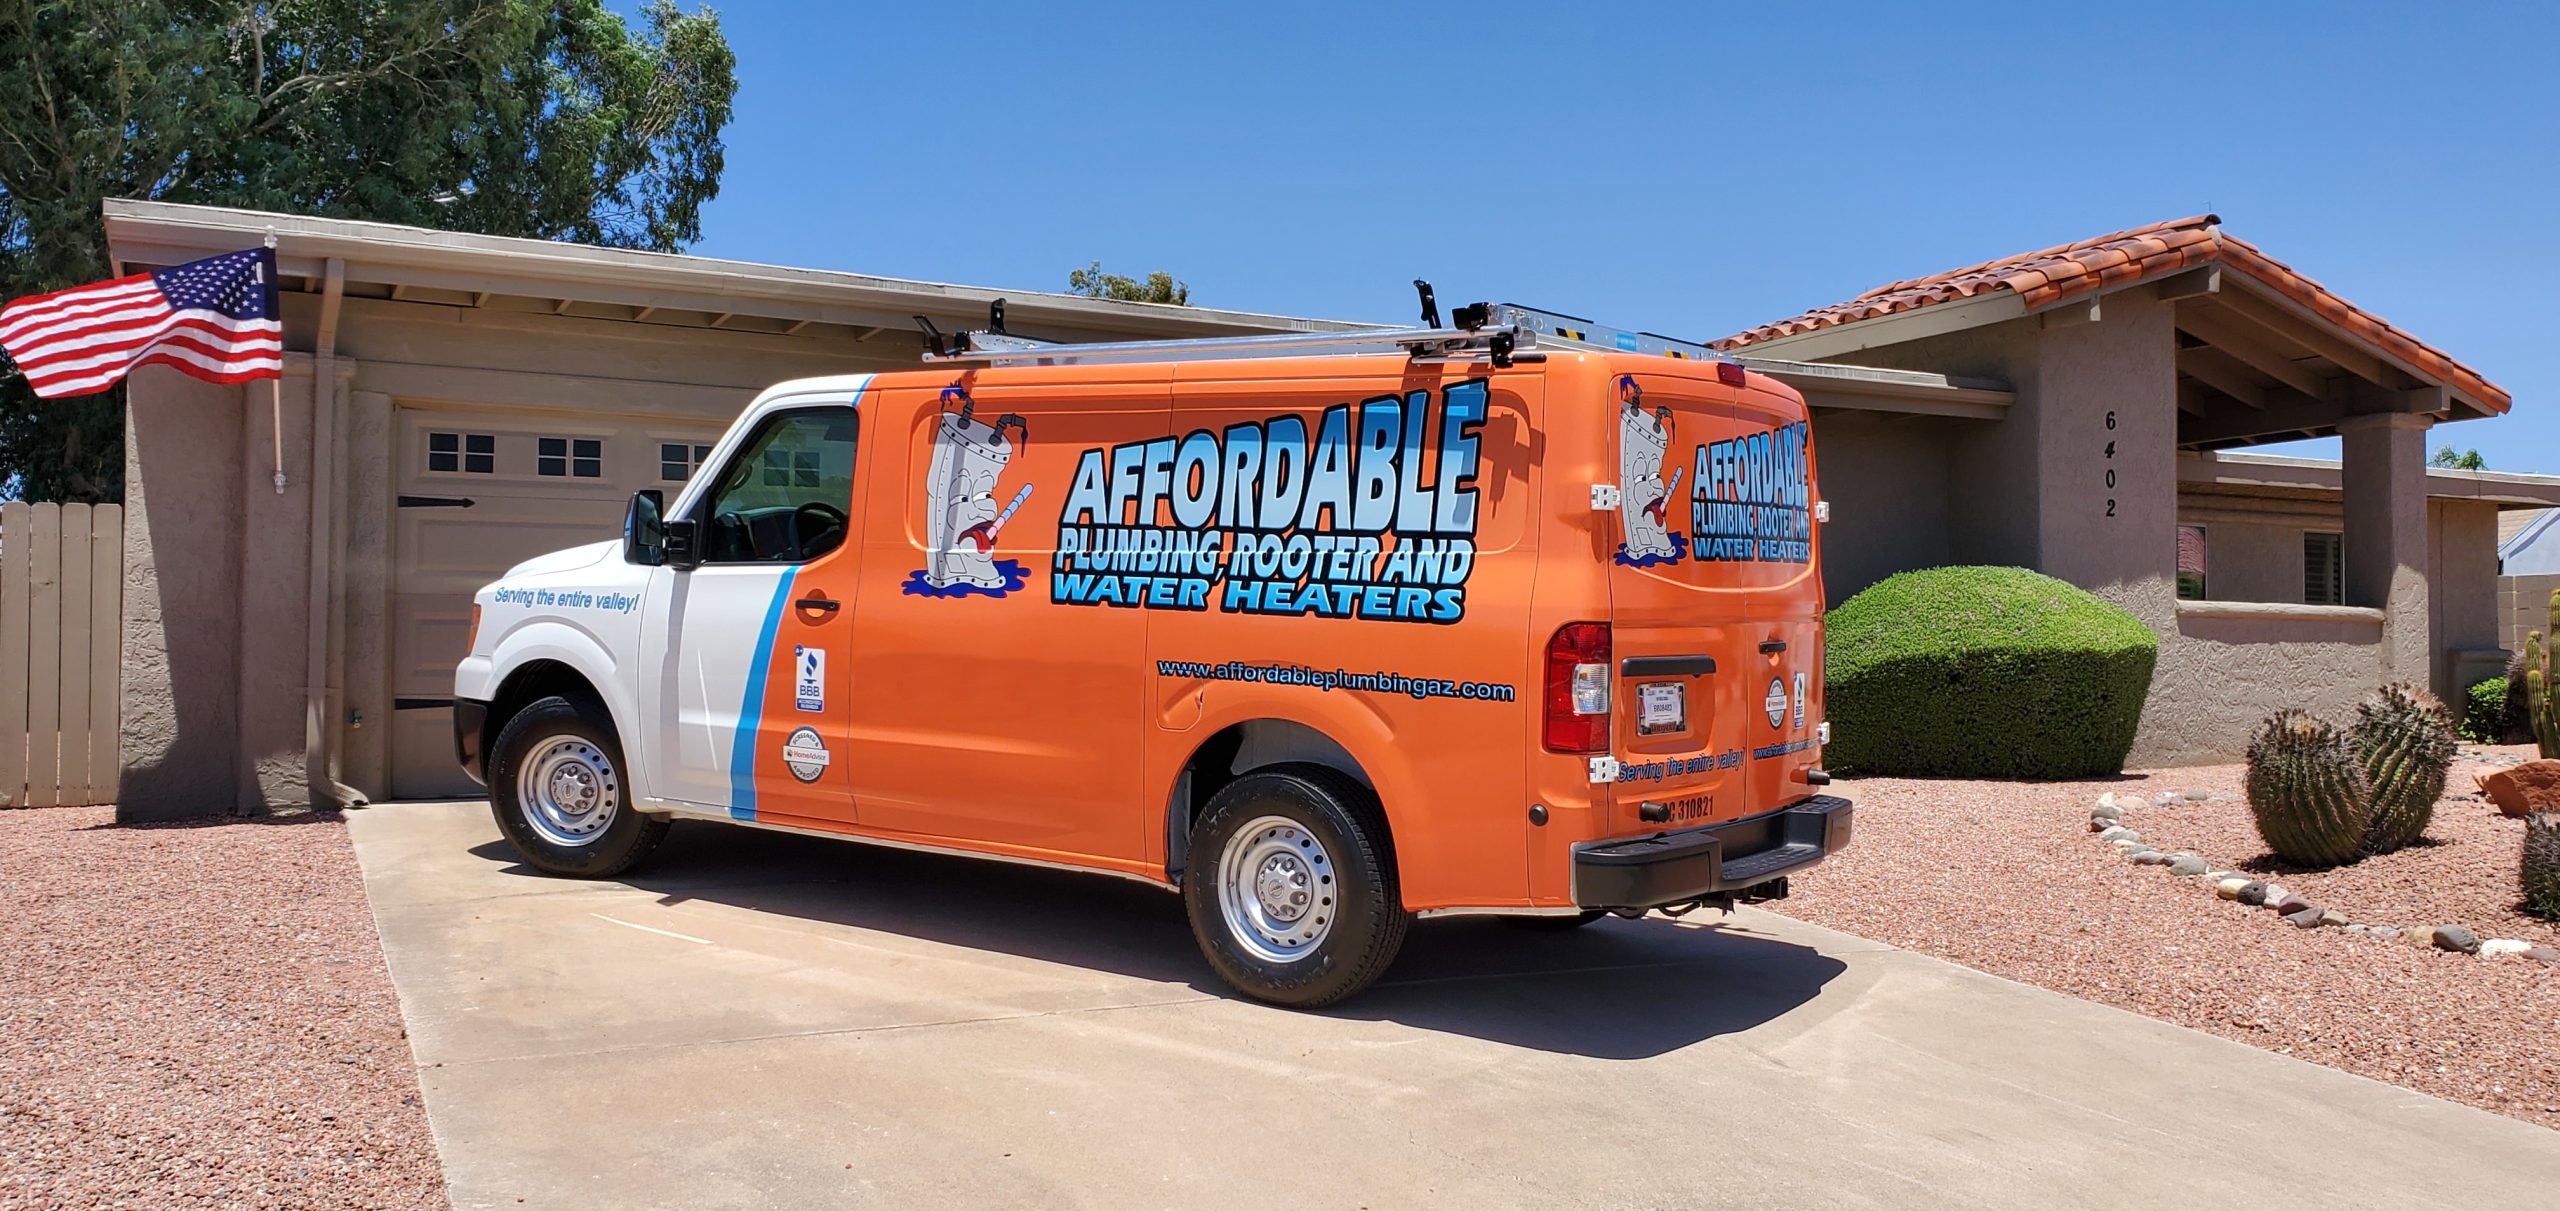 Affordable plumbing rooter and water heaters Service van